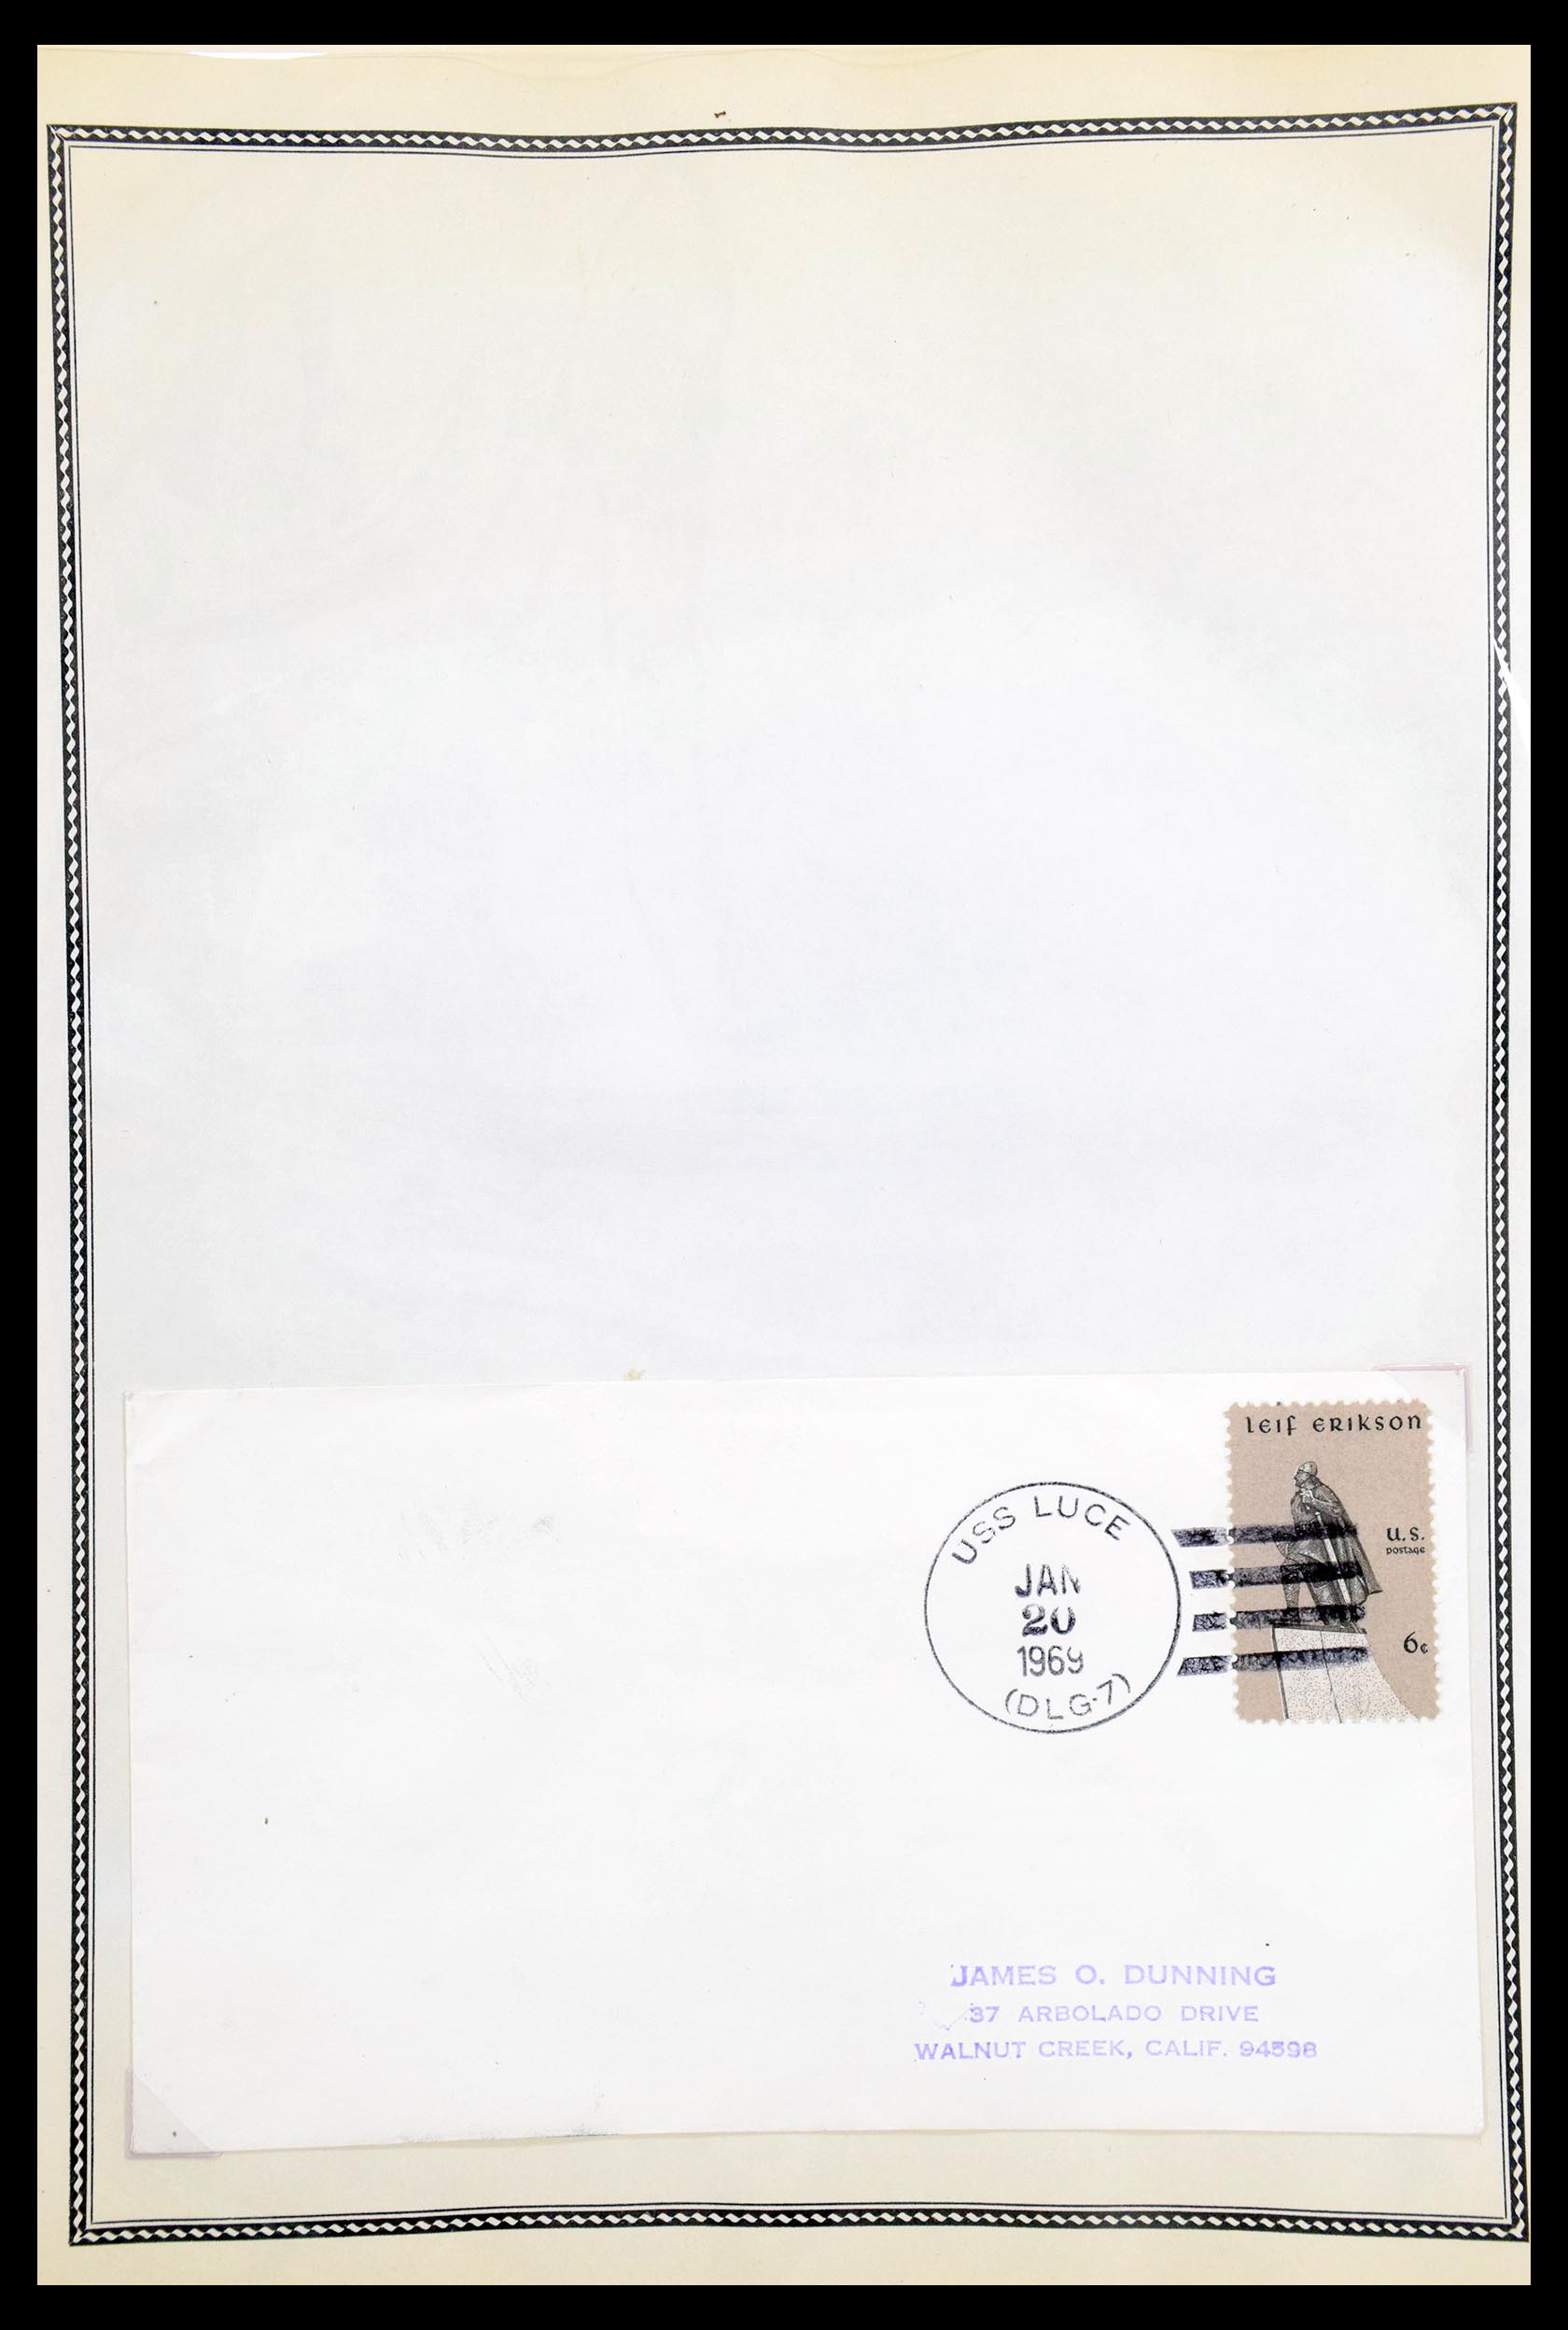 30341 098 - 30341 USA naval cover collection 1930-1970.